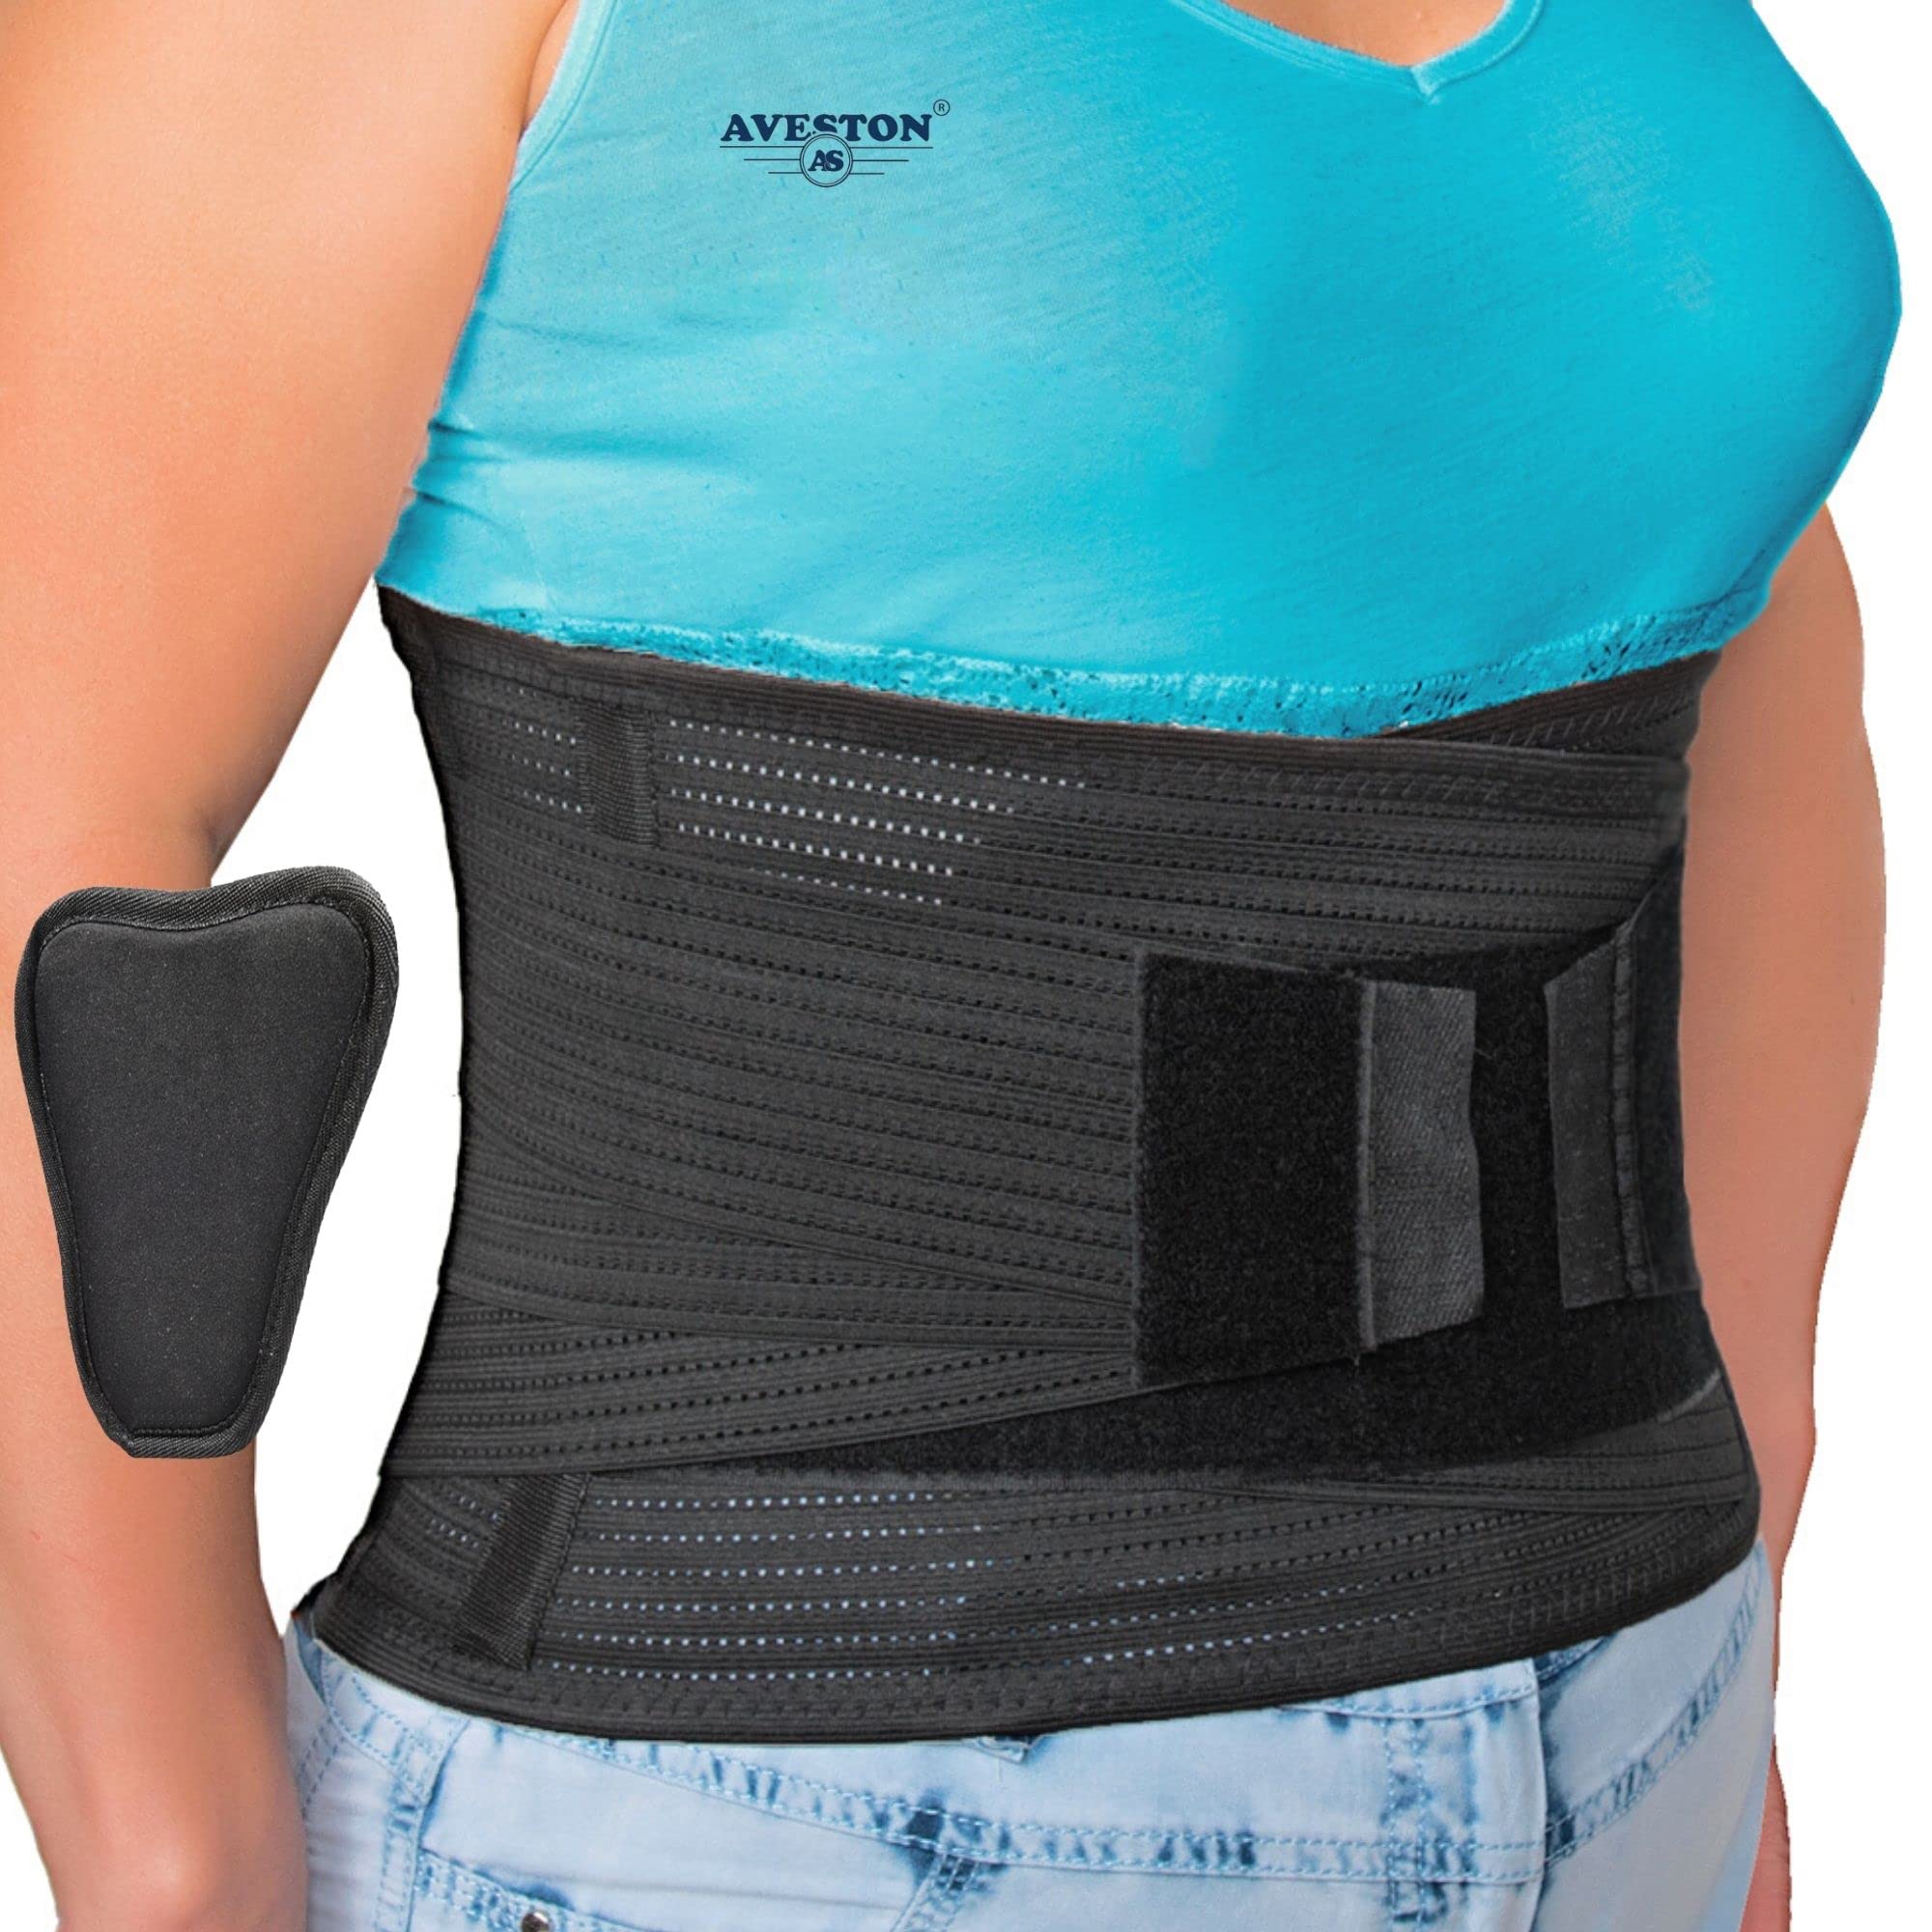 Full Back Support Brace with Removable Dorso-lumbar Pad - Back